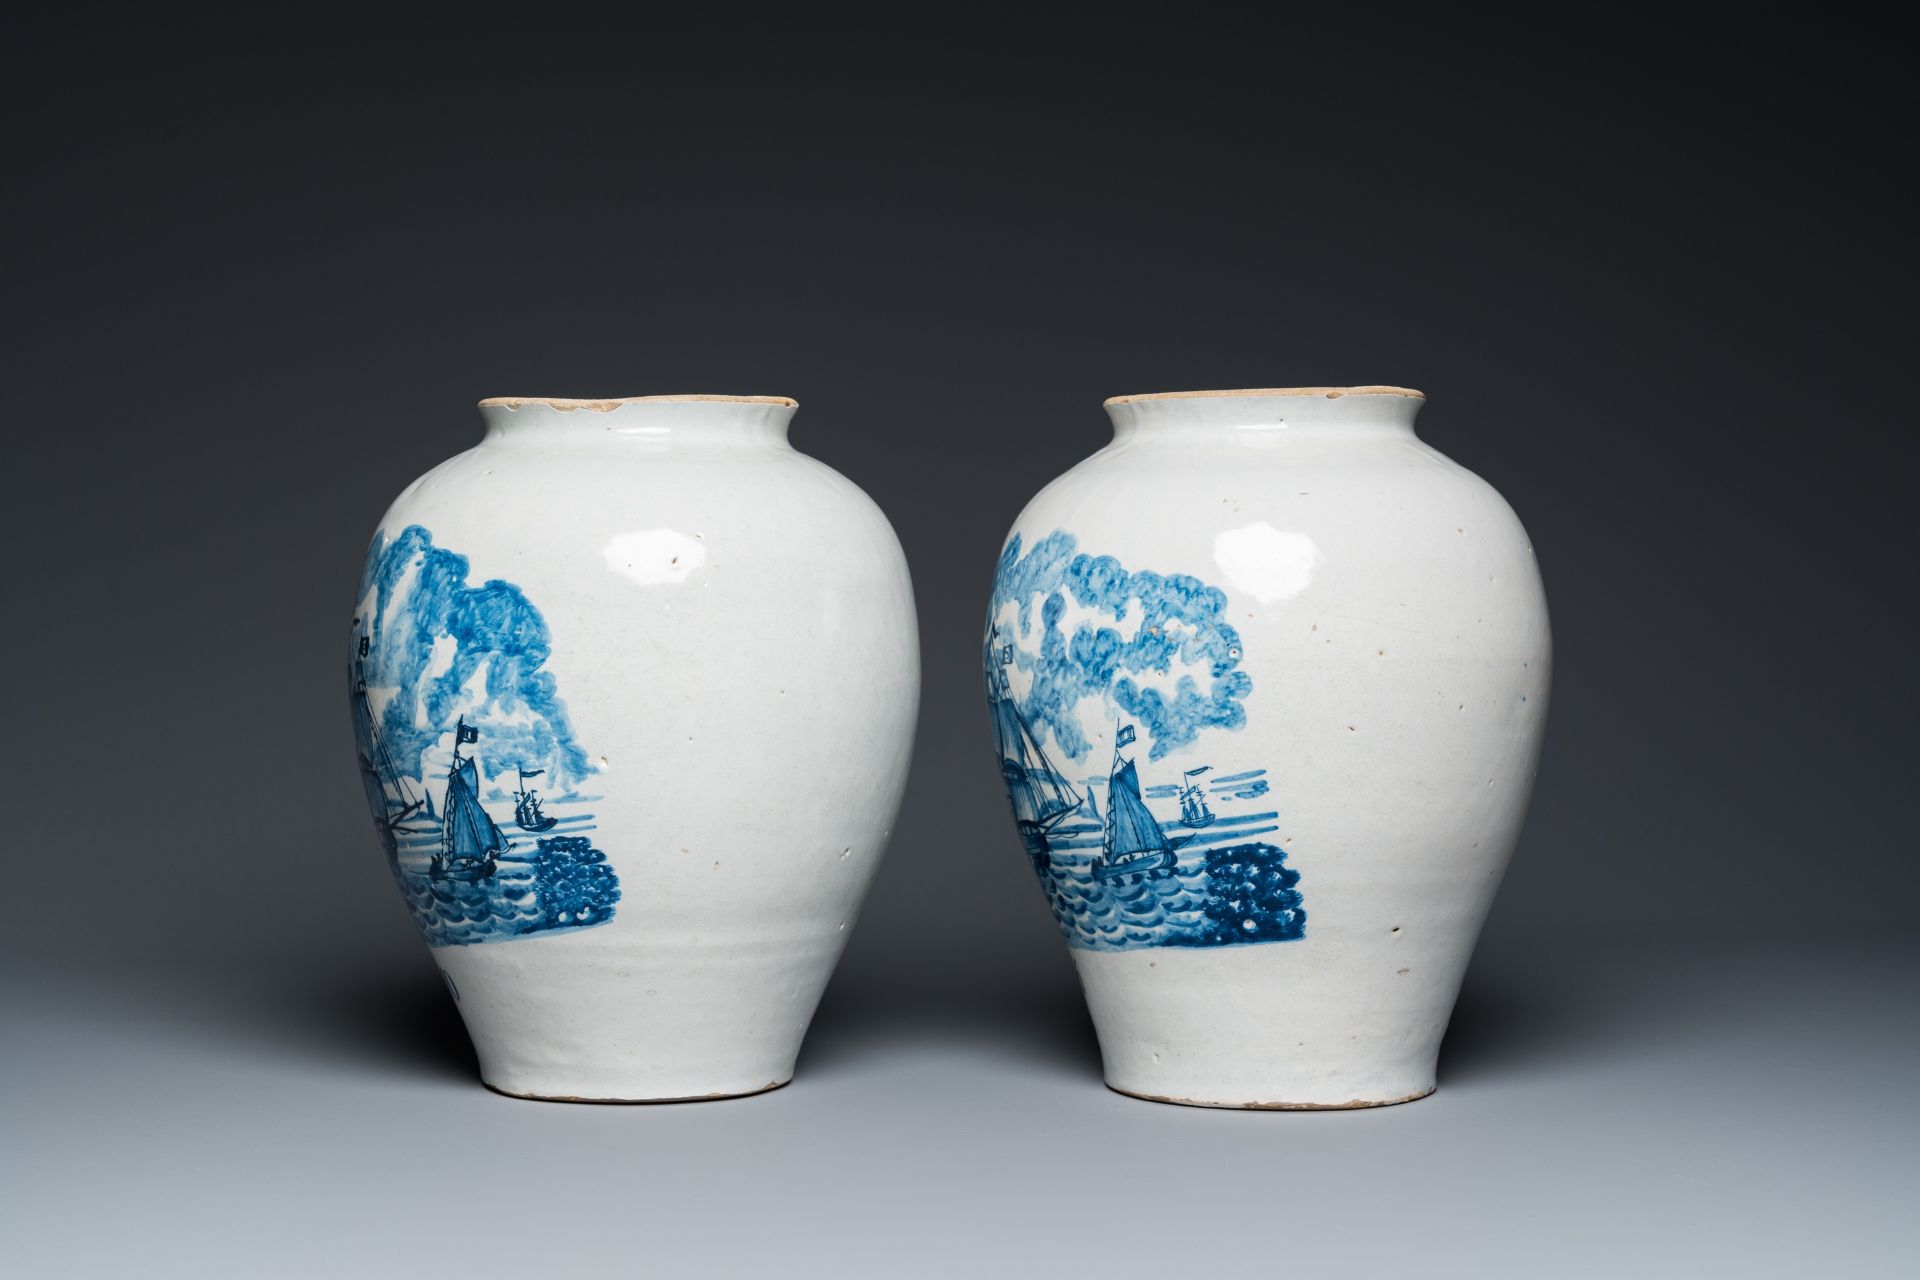 A pair of rare Dutch Delft blue and white 'maritime subject' tobacco jars with brass covers, 18th C. - Image 3 of 7